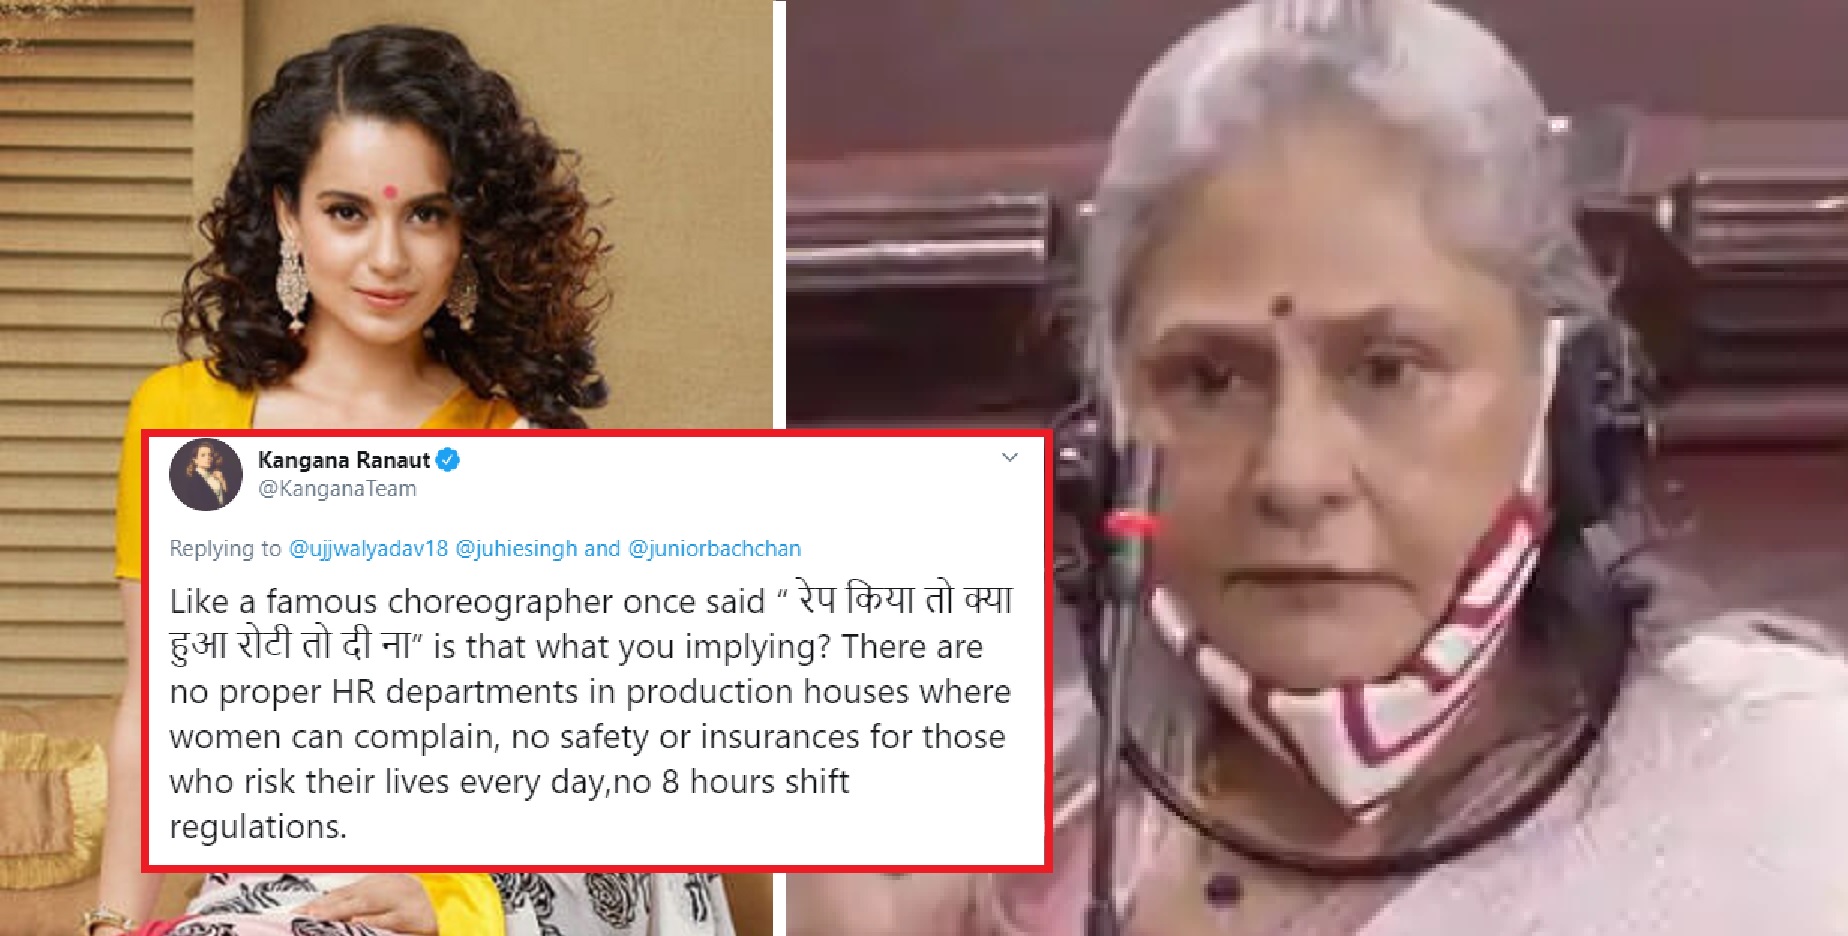 Jaya Bachchan Upset Over Bollywood Being “Targetted”, Kangana Ranaut Says, ‘What If It Happened With Your Son?’